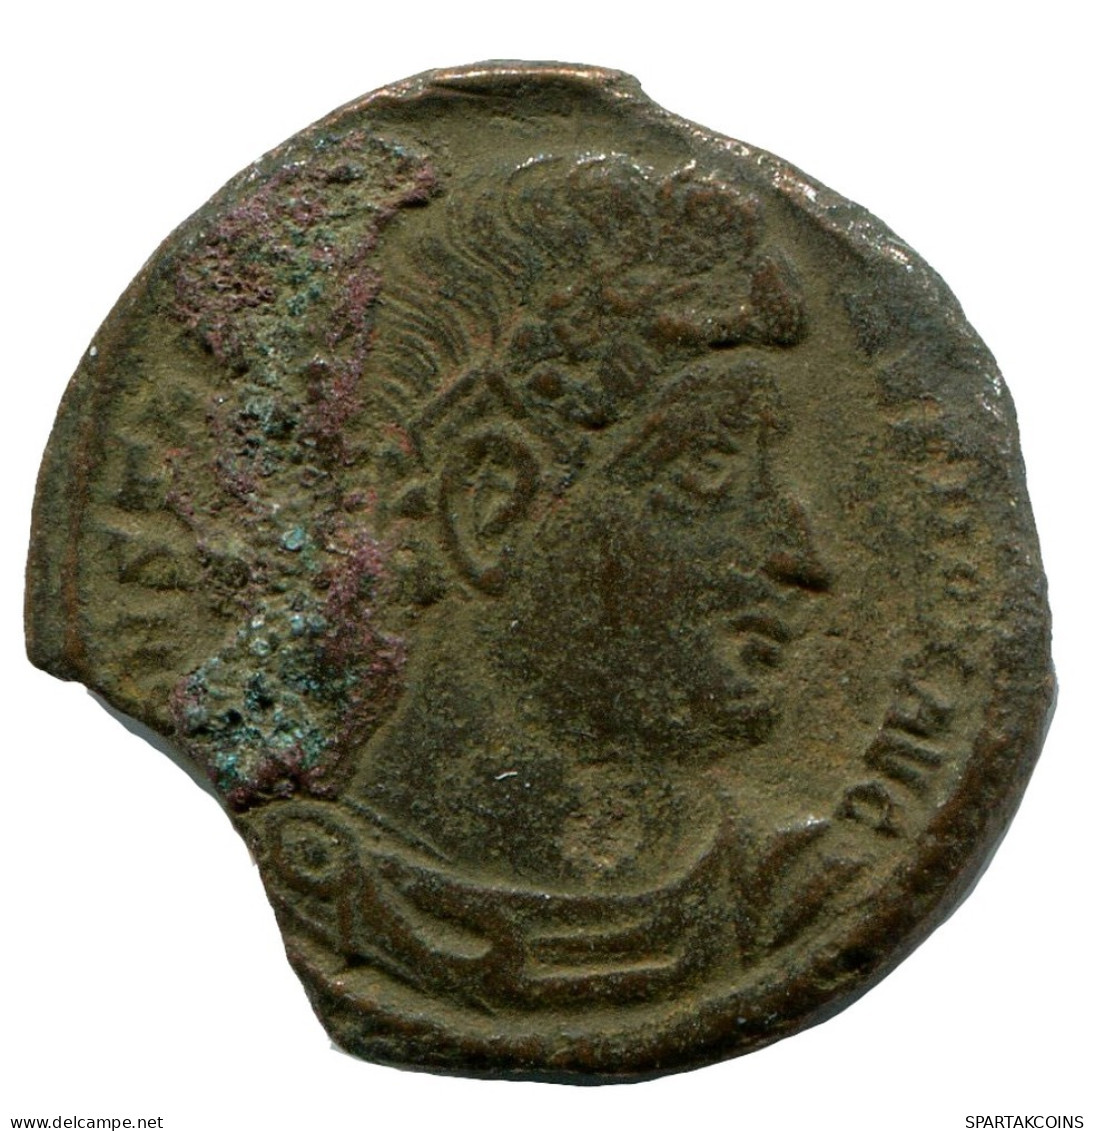 CONSTANTINE I MINTED IN NICOMEDIA FOUND IN IHNASYAH HOARD EGYPT #ANC10825.14.U.A - The Christian Empire (307 AD Tot 363 AD)